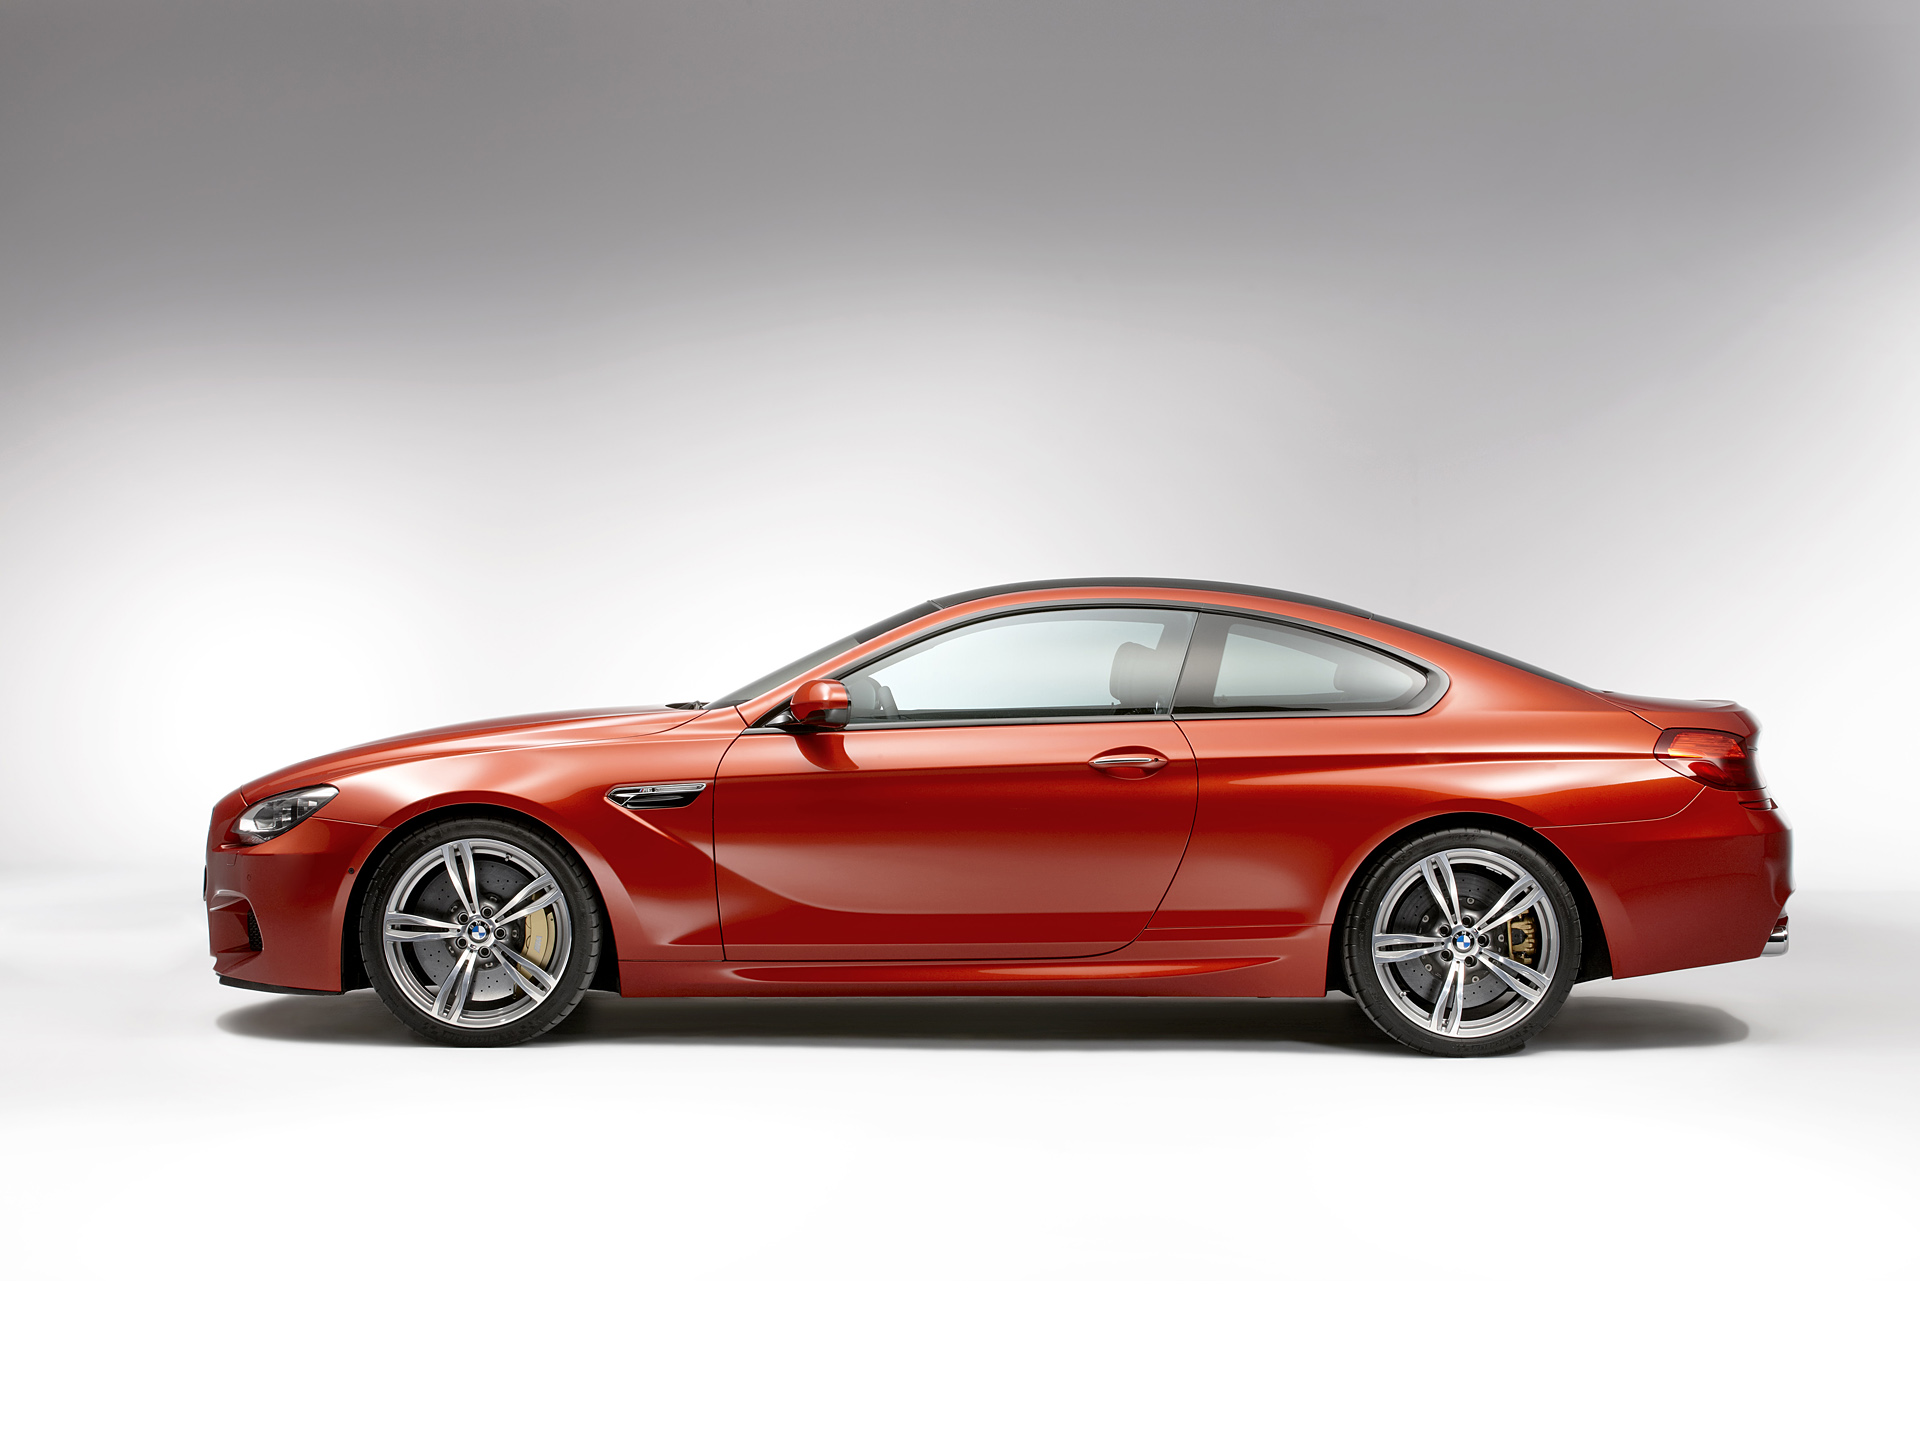 vehicles, bmw m6 coupe, bmw